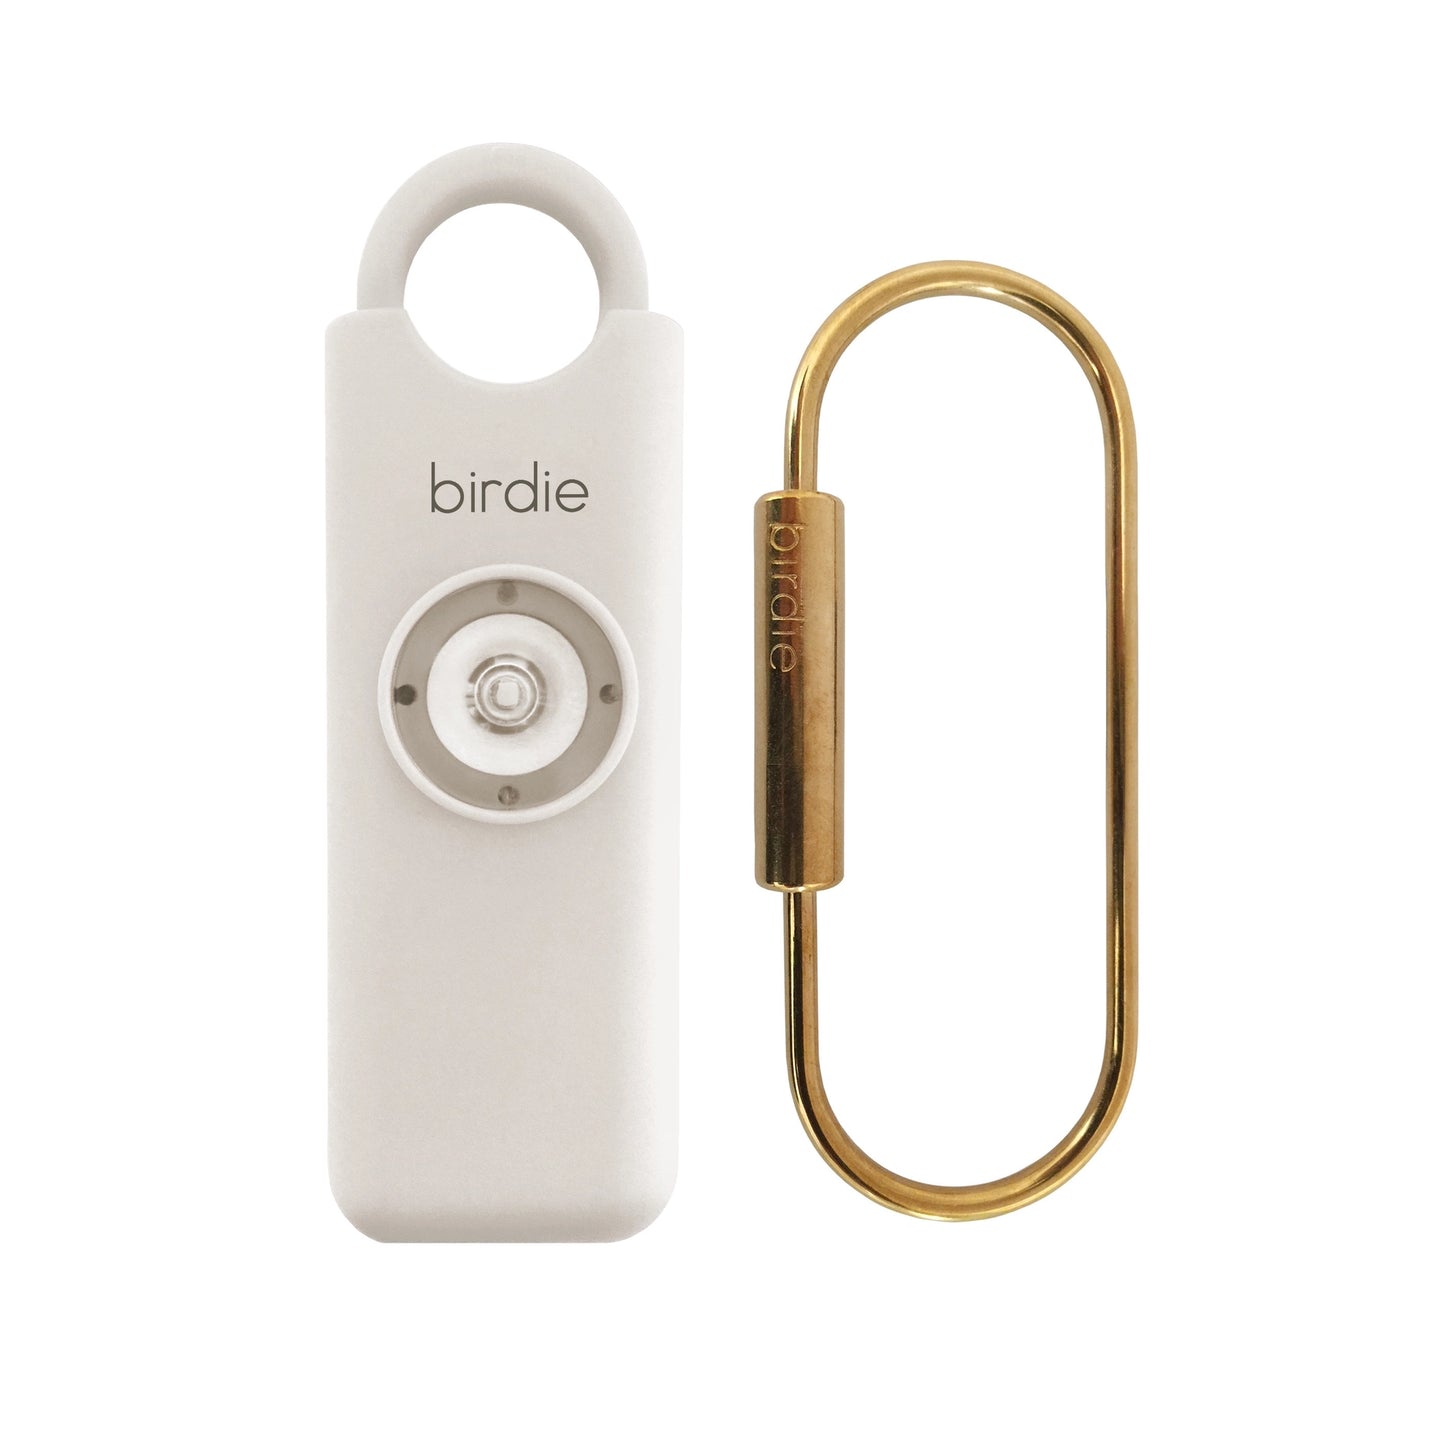 She's Birdie Personal Safety Alarm | Coconut